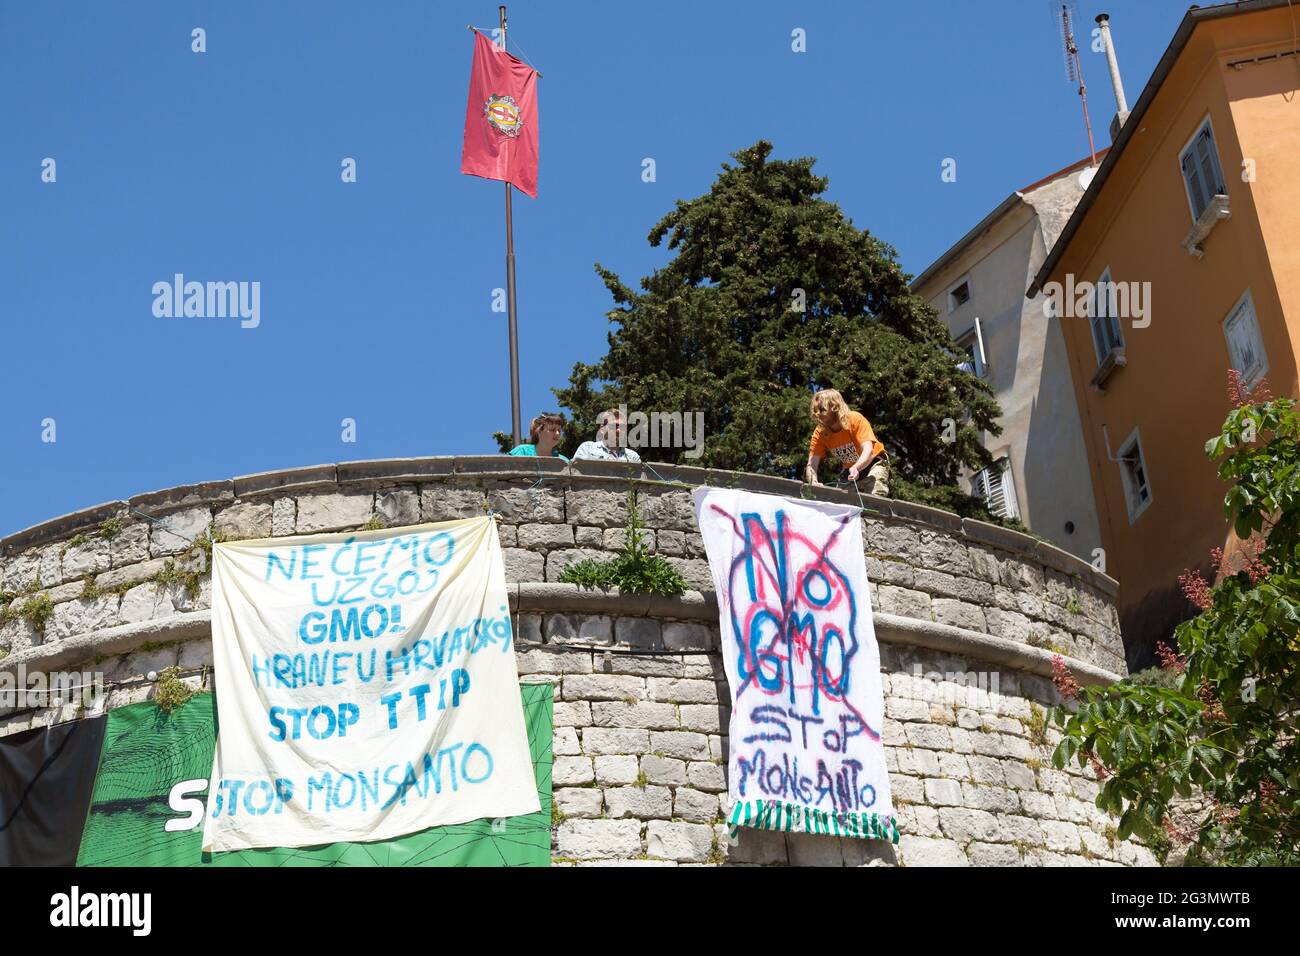 '21.05.2016, Labin, Istria, Croatia - Environmental activists unfurl banners against Monsanto, TTIP and GMO (genetically modified organism). 00A160521 Stock Photo